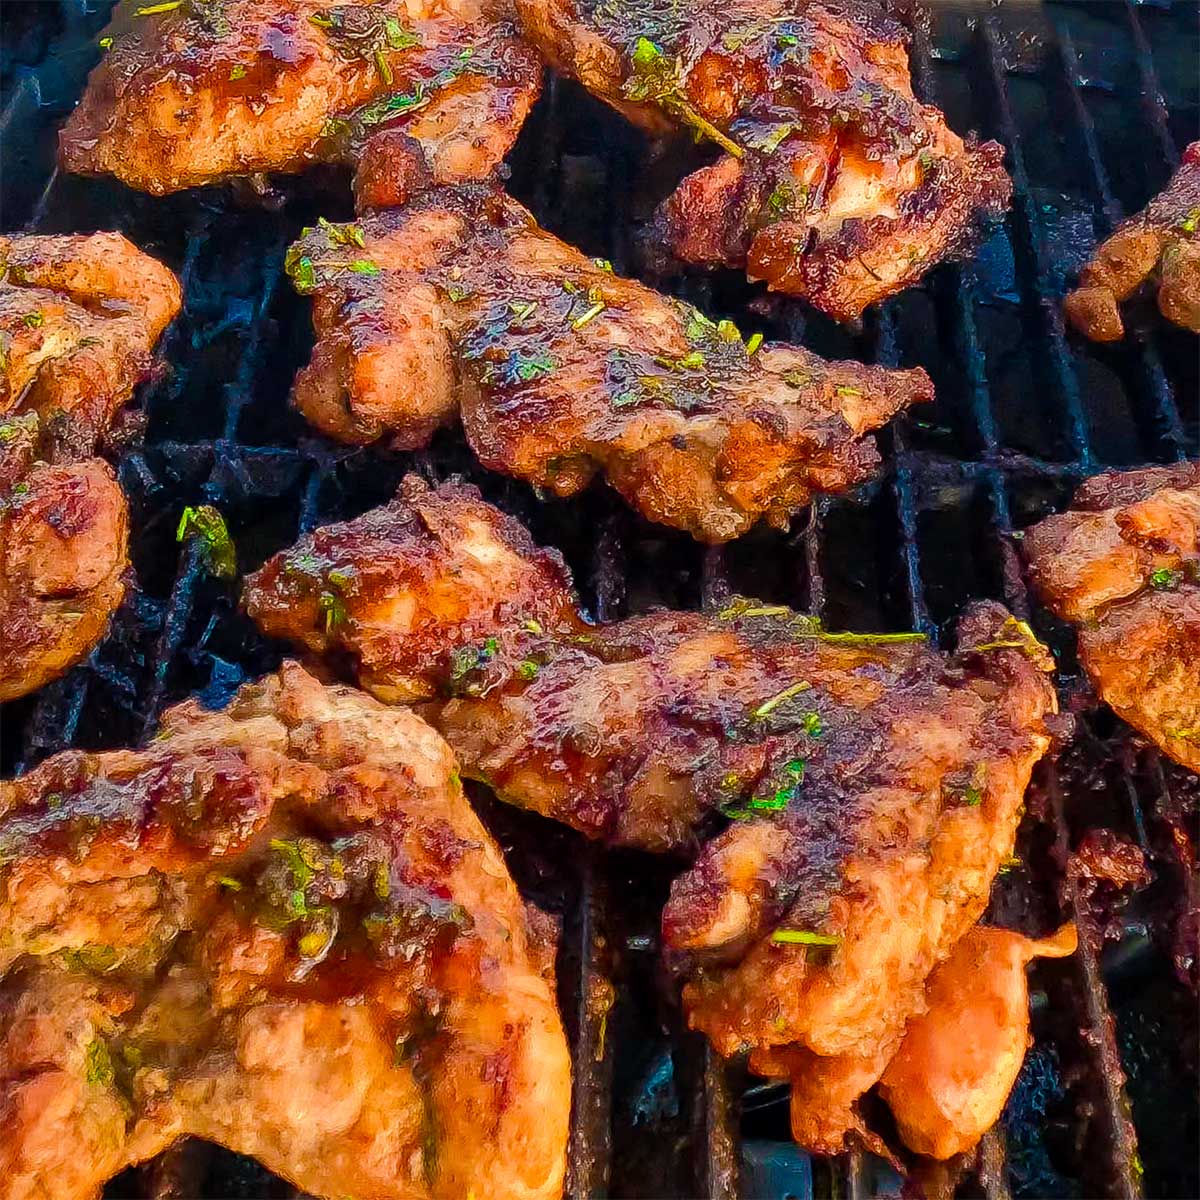 Flame grilled keto chicken thighs on a BBQ grill.